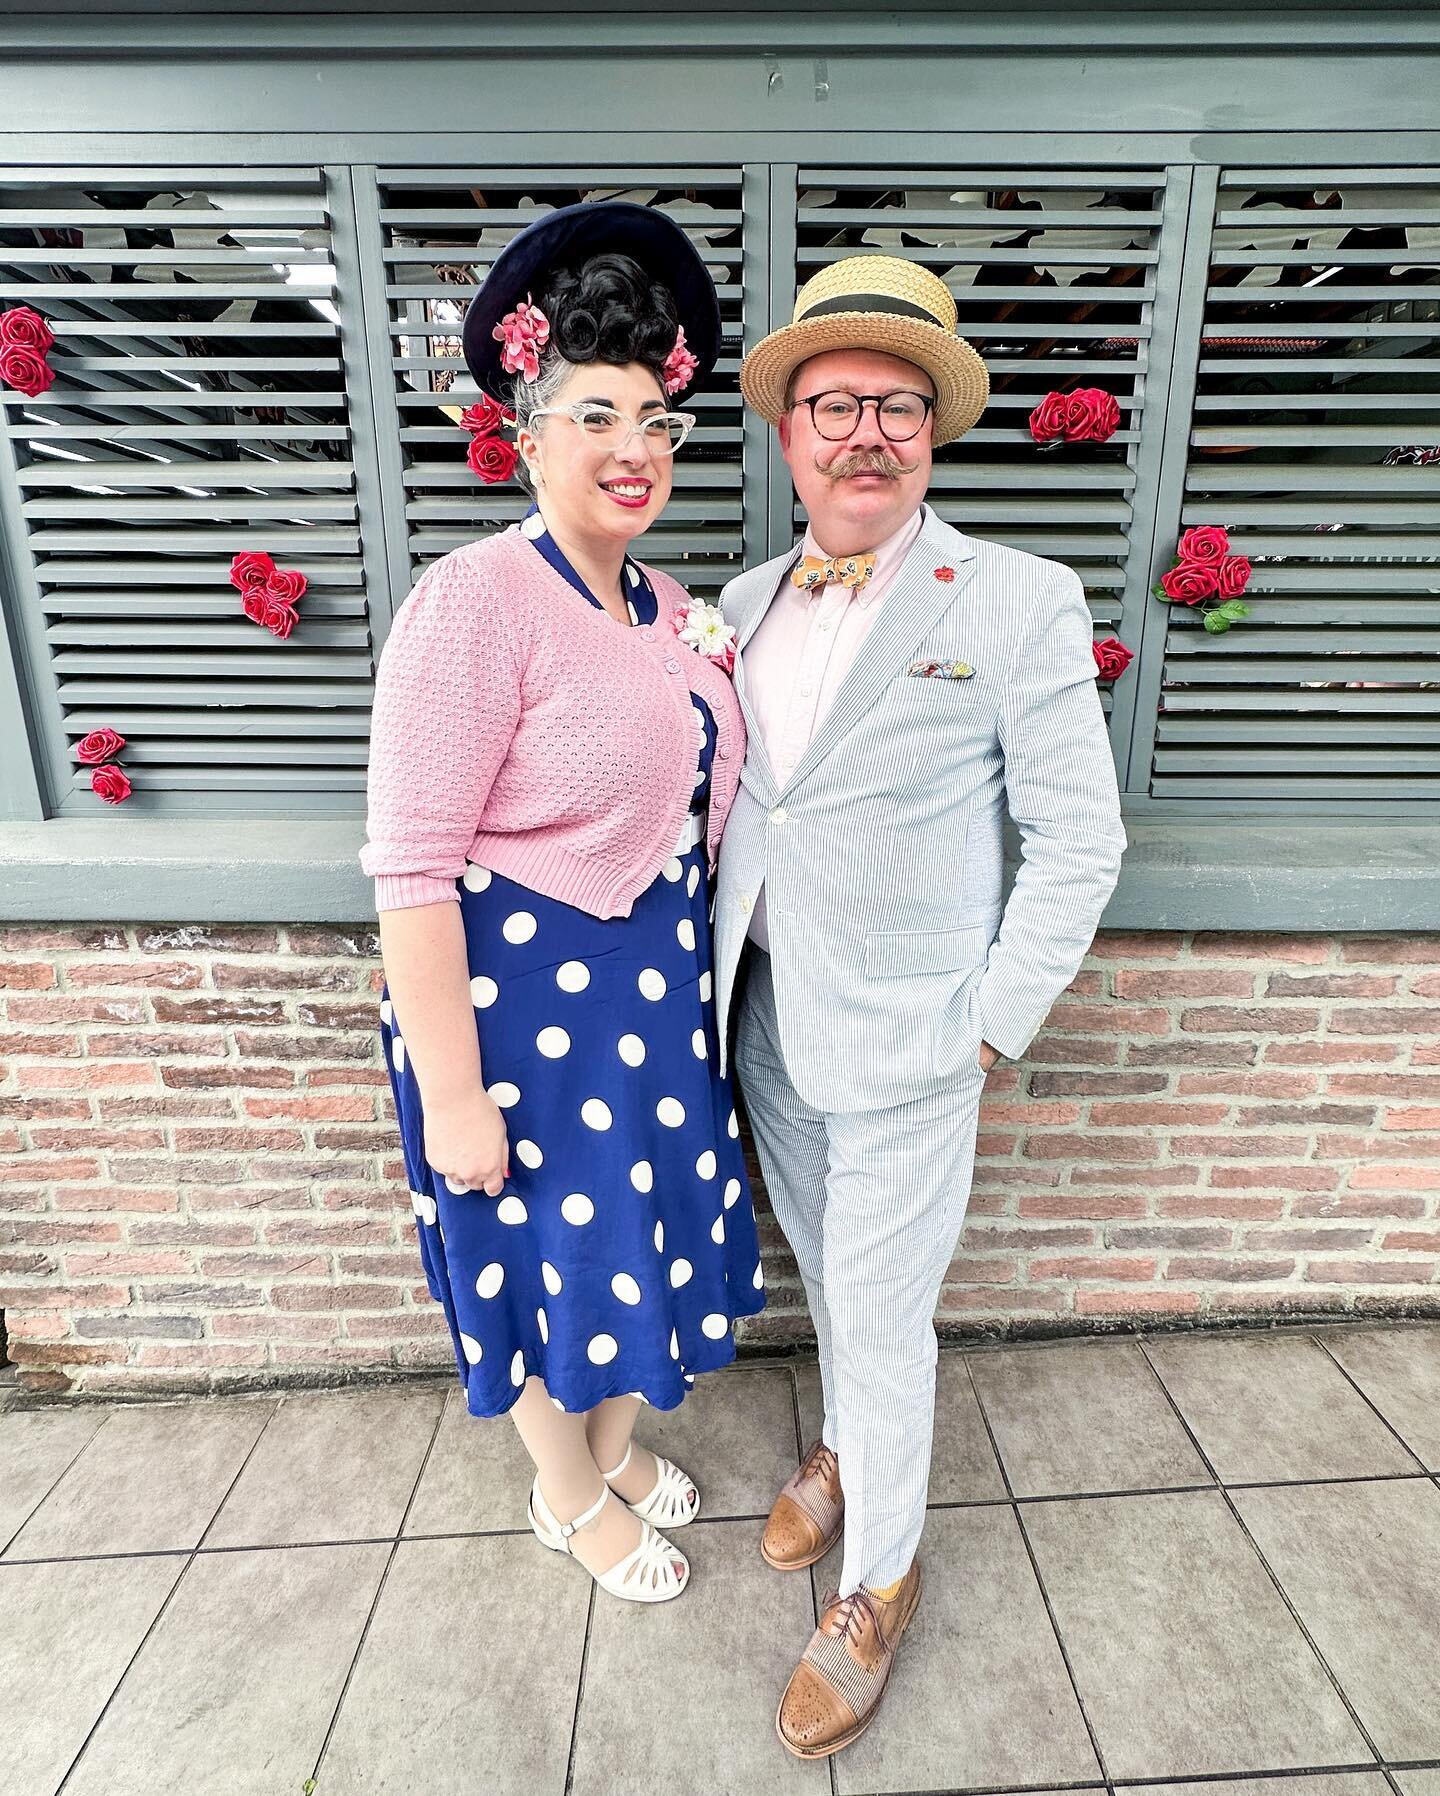 Congratulations to our #DerbyDay Best Dressed winners! 🌹🌹🌹

Ya&rsquo;ll looked 🔥